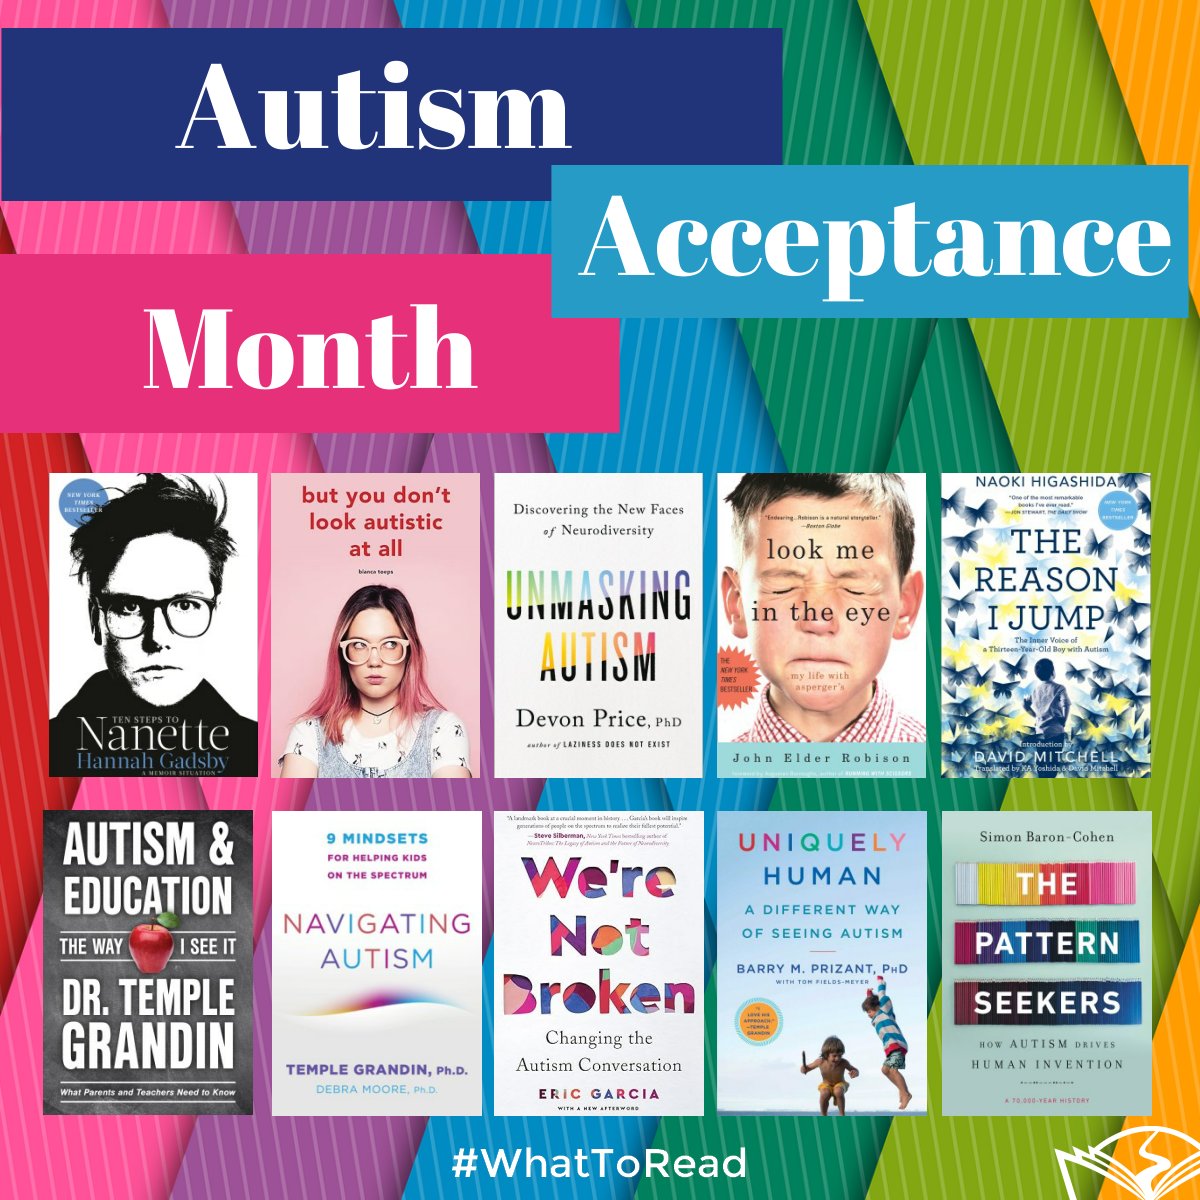 Listen to @kunrpublicradio 's 'On the Shelf' Monday at 6:42 am, 8:42 am, and 3:48 pm to hear Laurie sharing nonfiction titles by autistic authors. #WhatToRead Austism Acceptance Month book list: washoelibrary.org/3TQumpQ Past On the Shelf segments: catalog.washoecountylibrary.us/ots